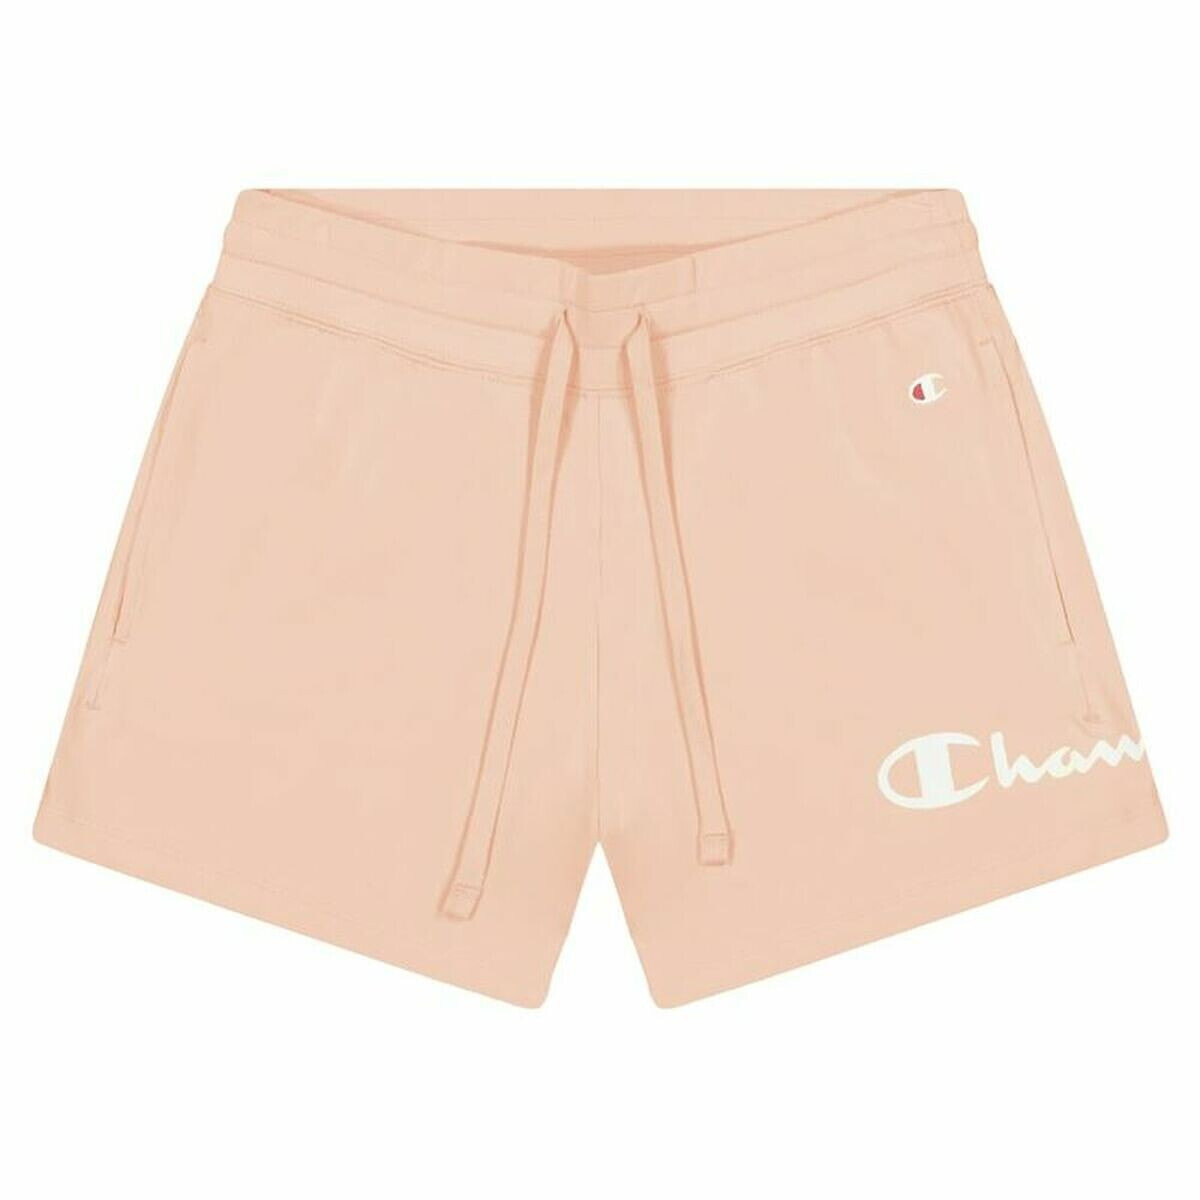 Sports Shorts for Women Champion Drawcord Pocket W Pink